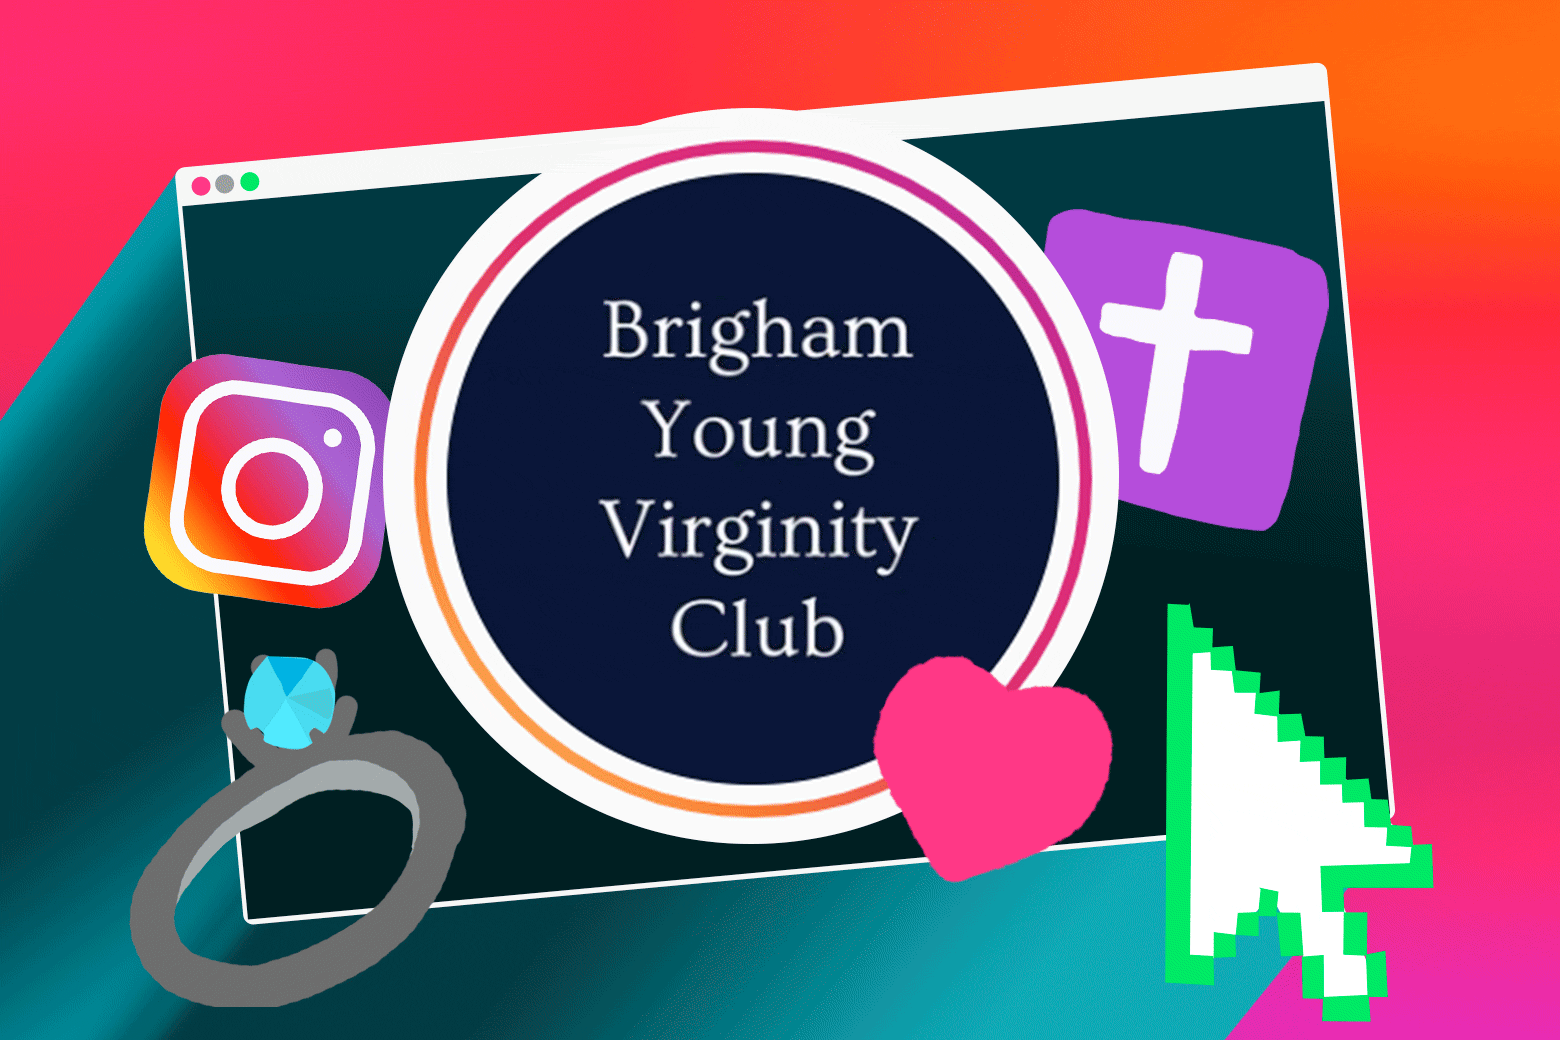 Brigham Young University Virginity Club Who S Behind The Popular Instagram